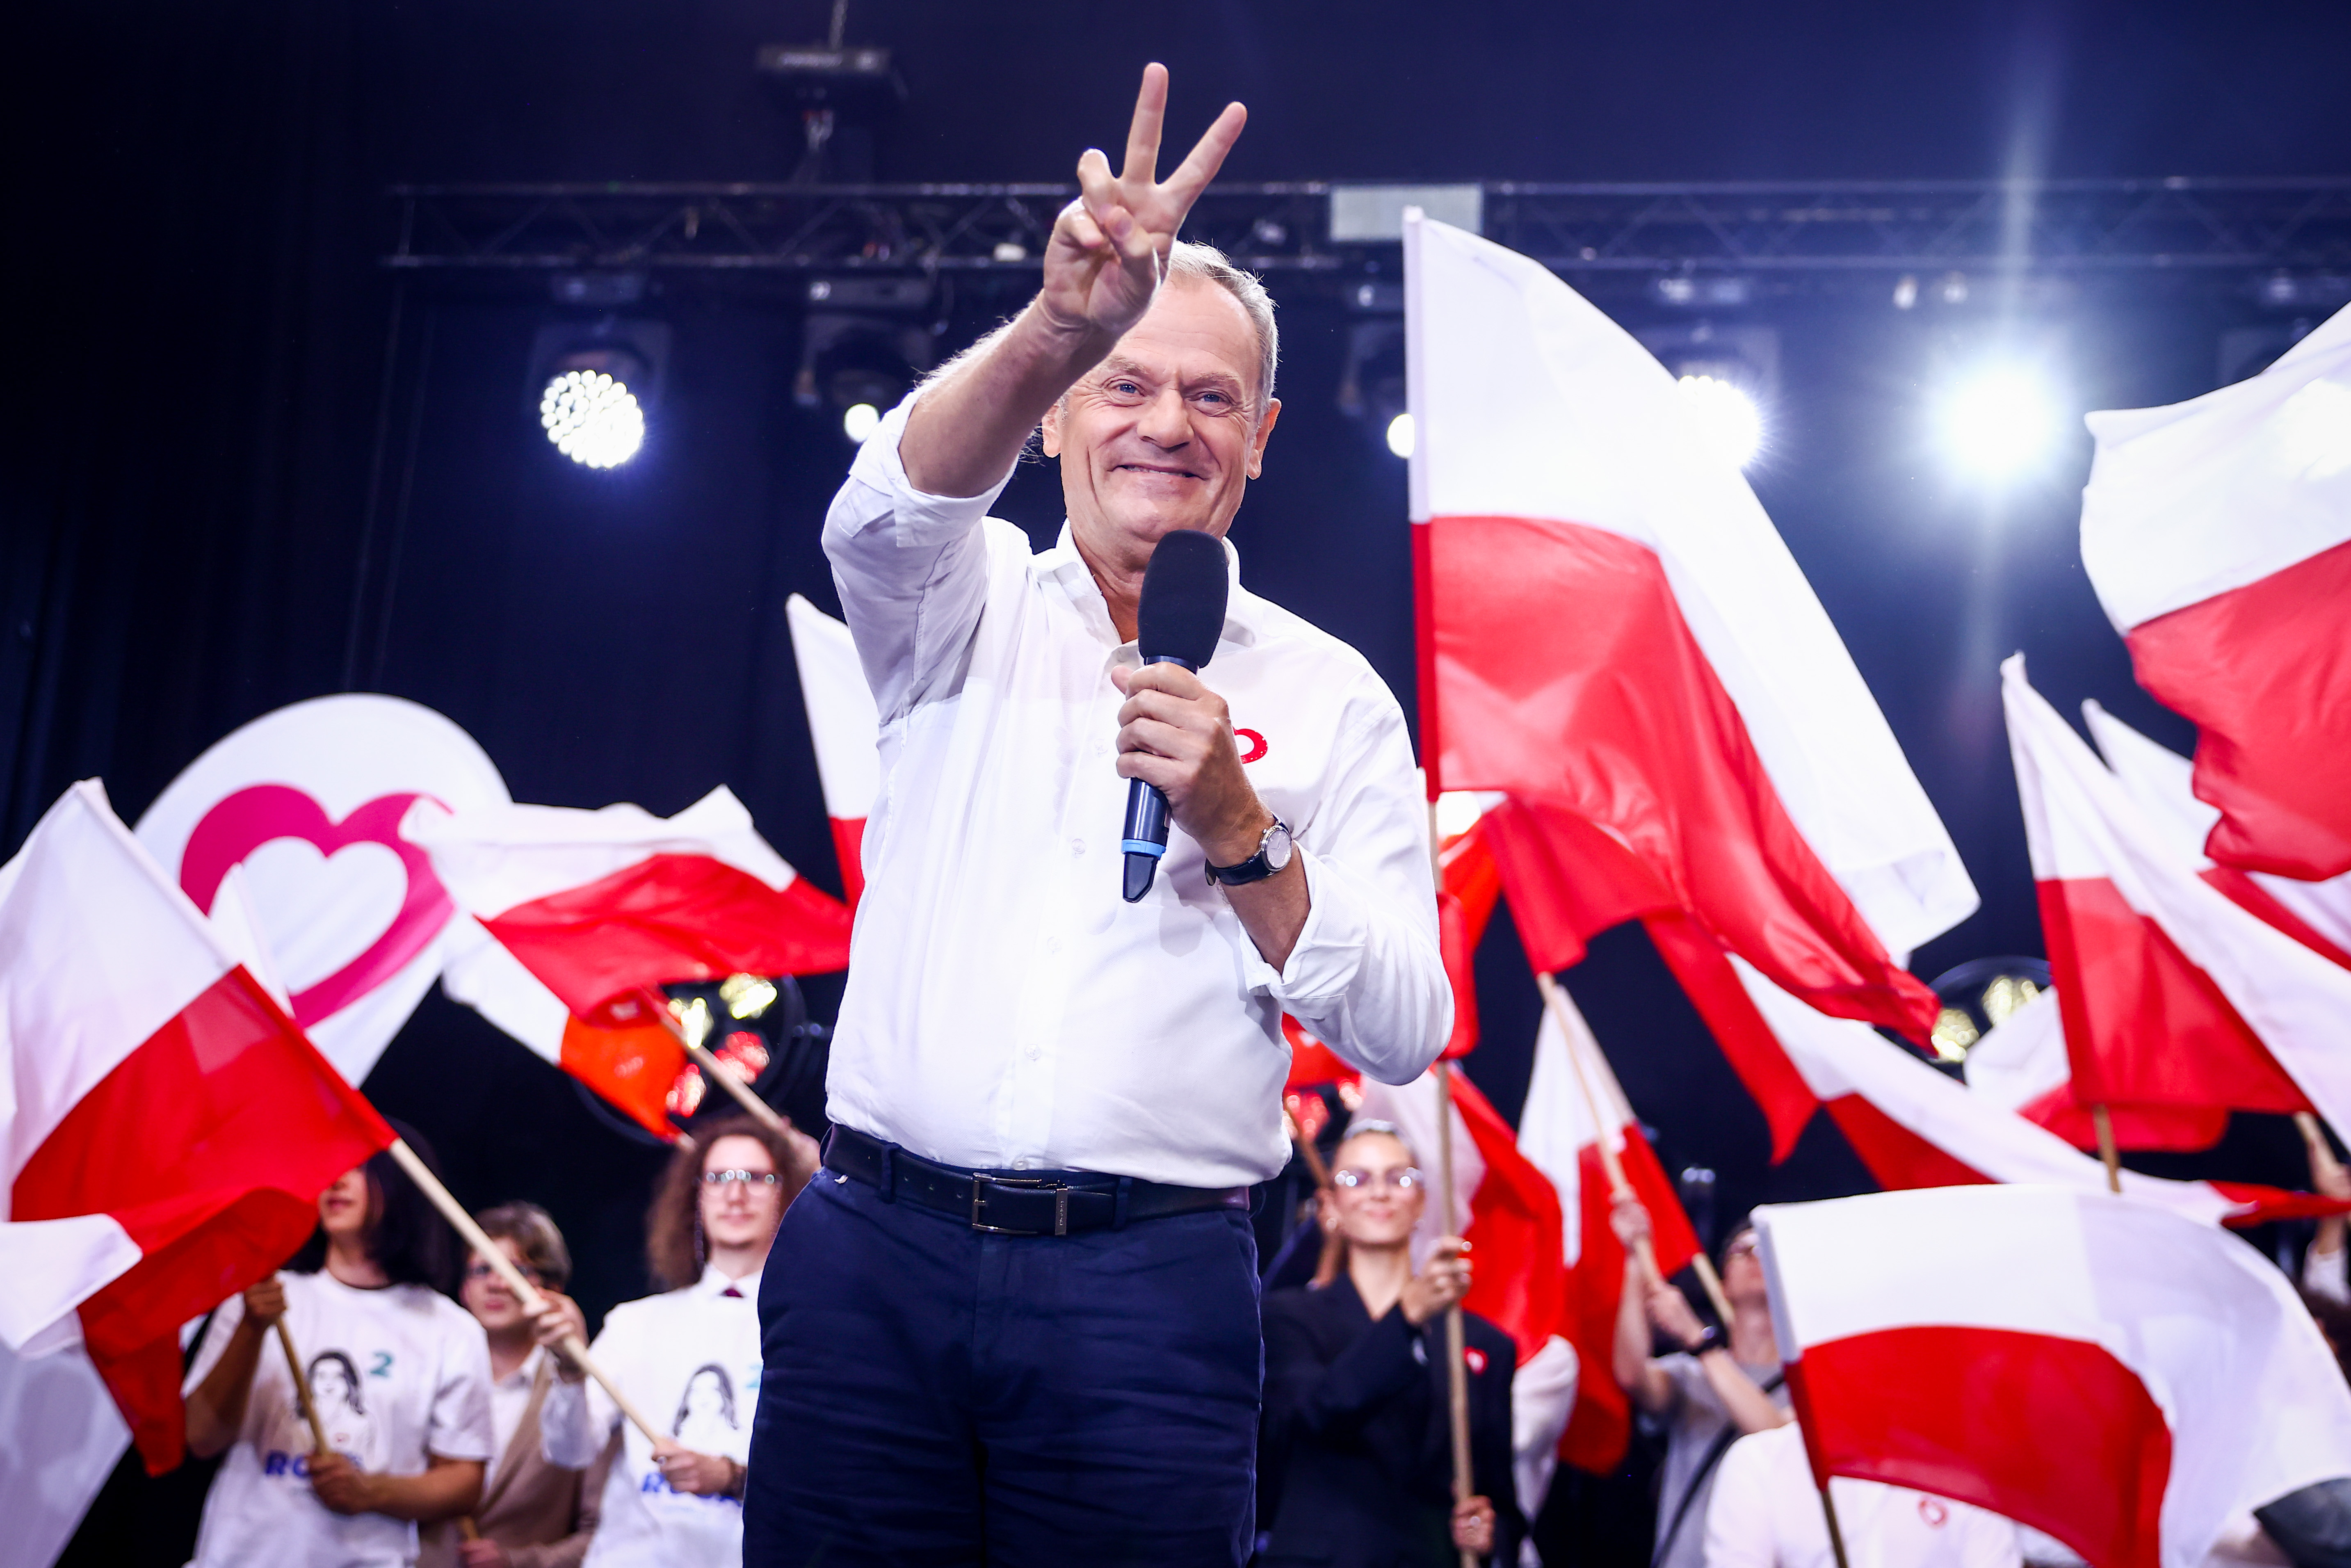 Donald Tusk, amid waving red-and-white flags, holds a microphone in one hand and makes a V-sign with the other.